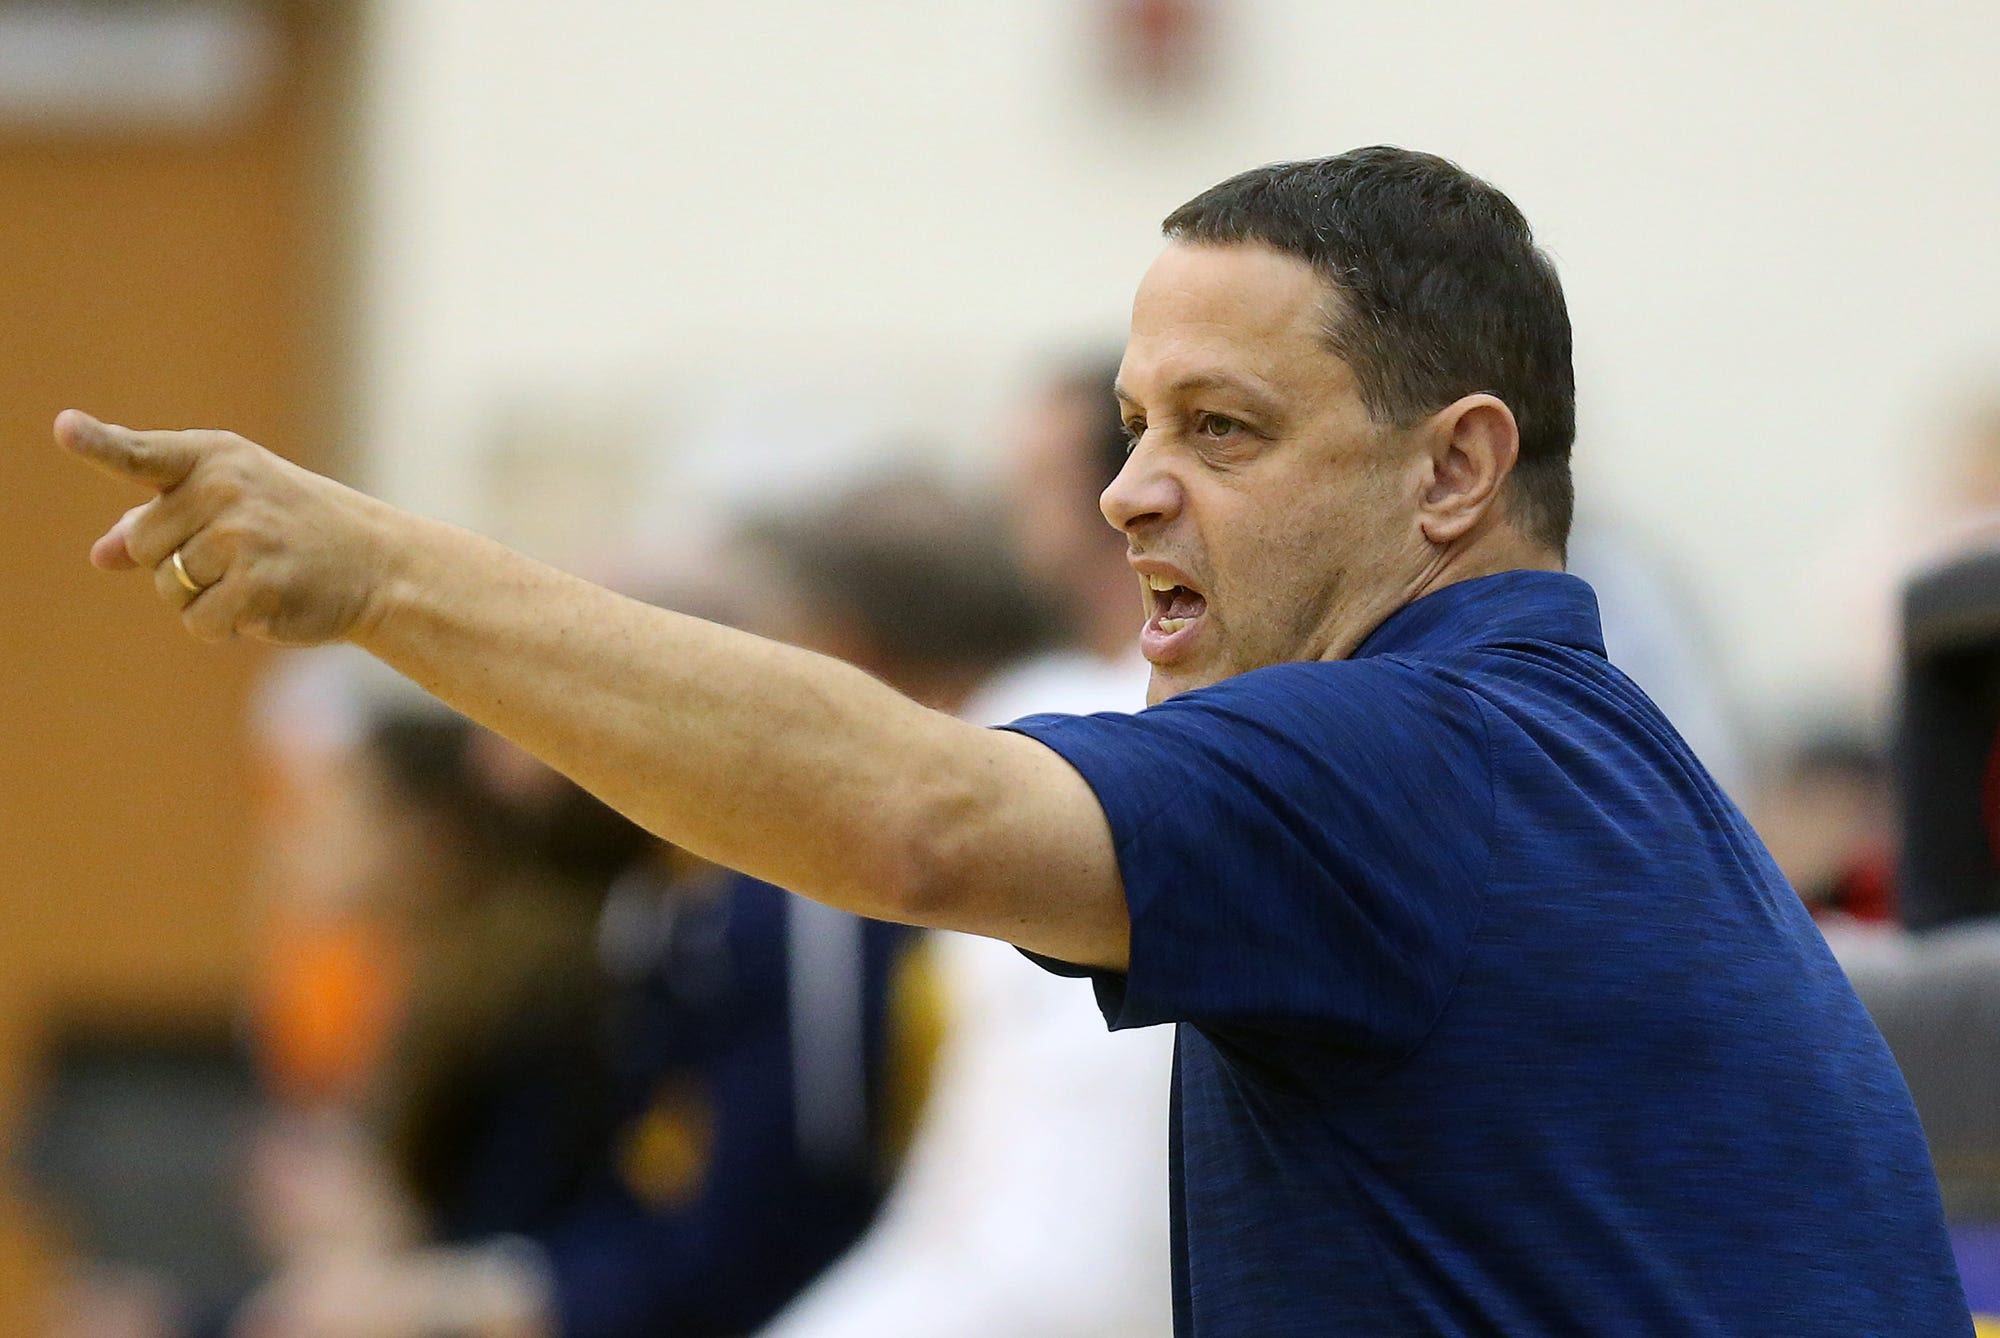 'Too good to be true': Those who invested with former Copley coach share their stories